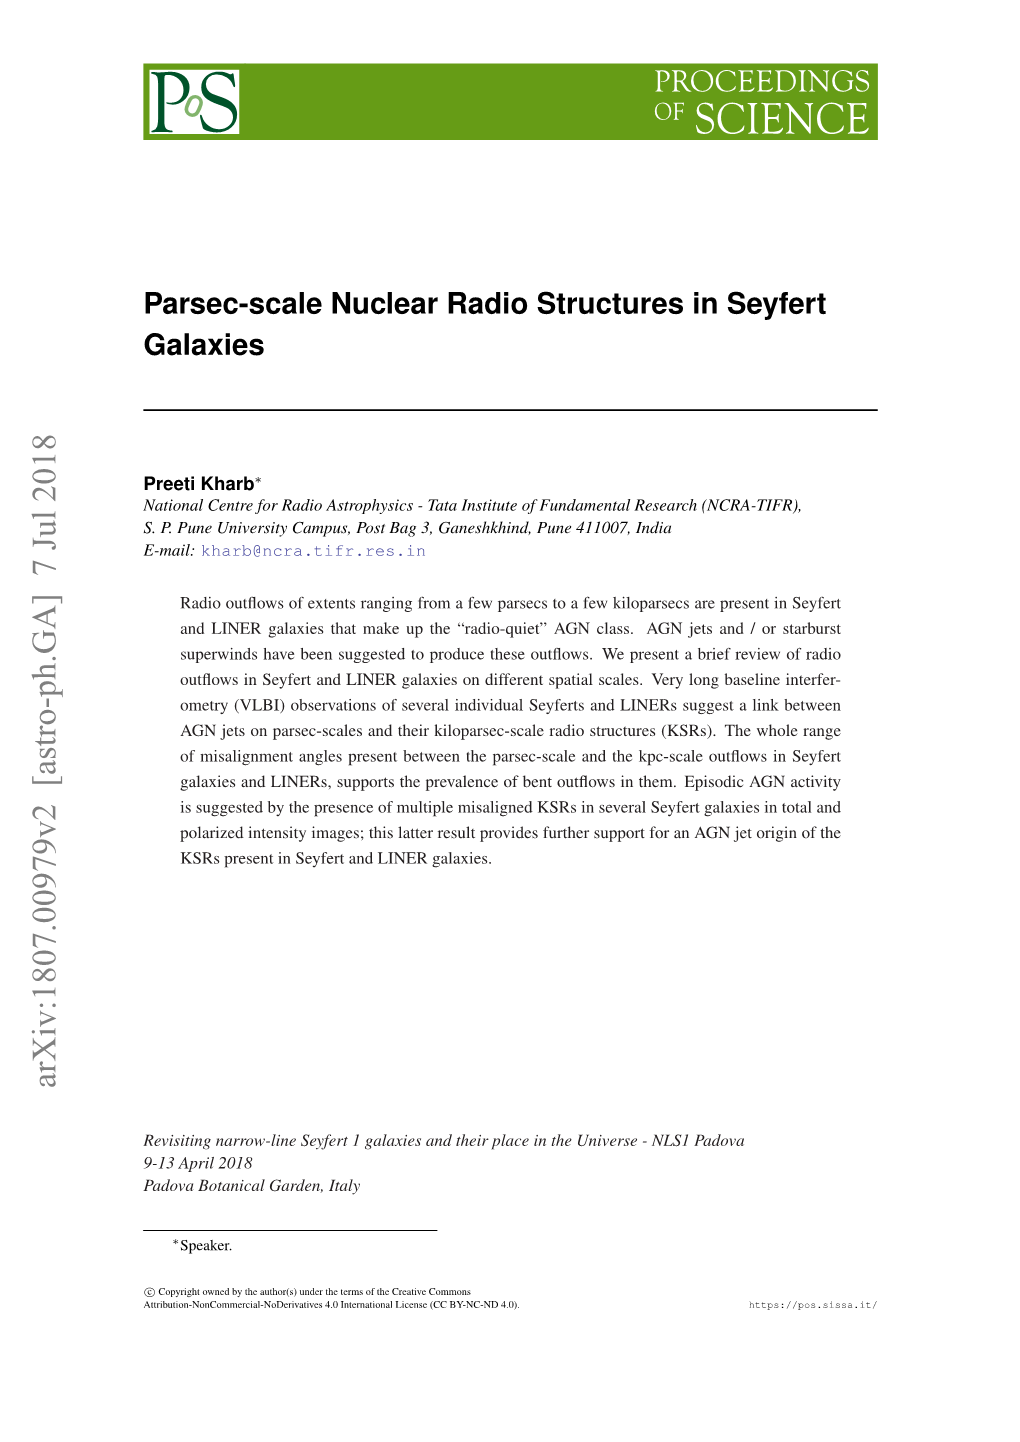 Parsec-Scale Nuclear Radio Structures in Seyfert Galaxies